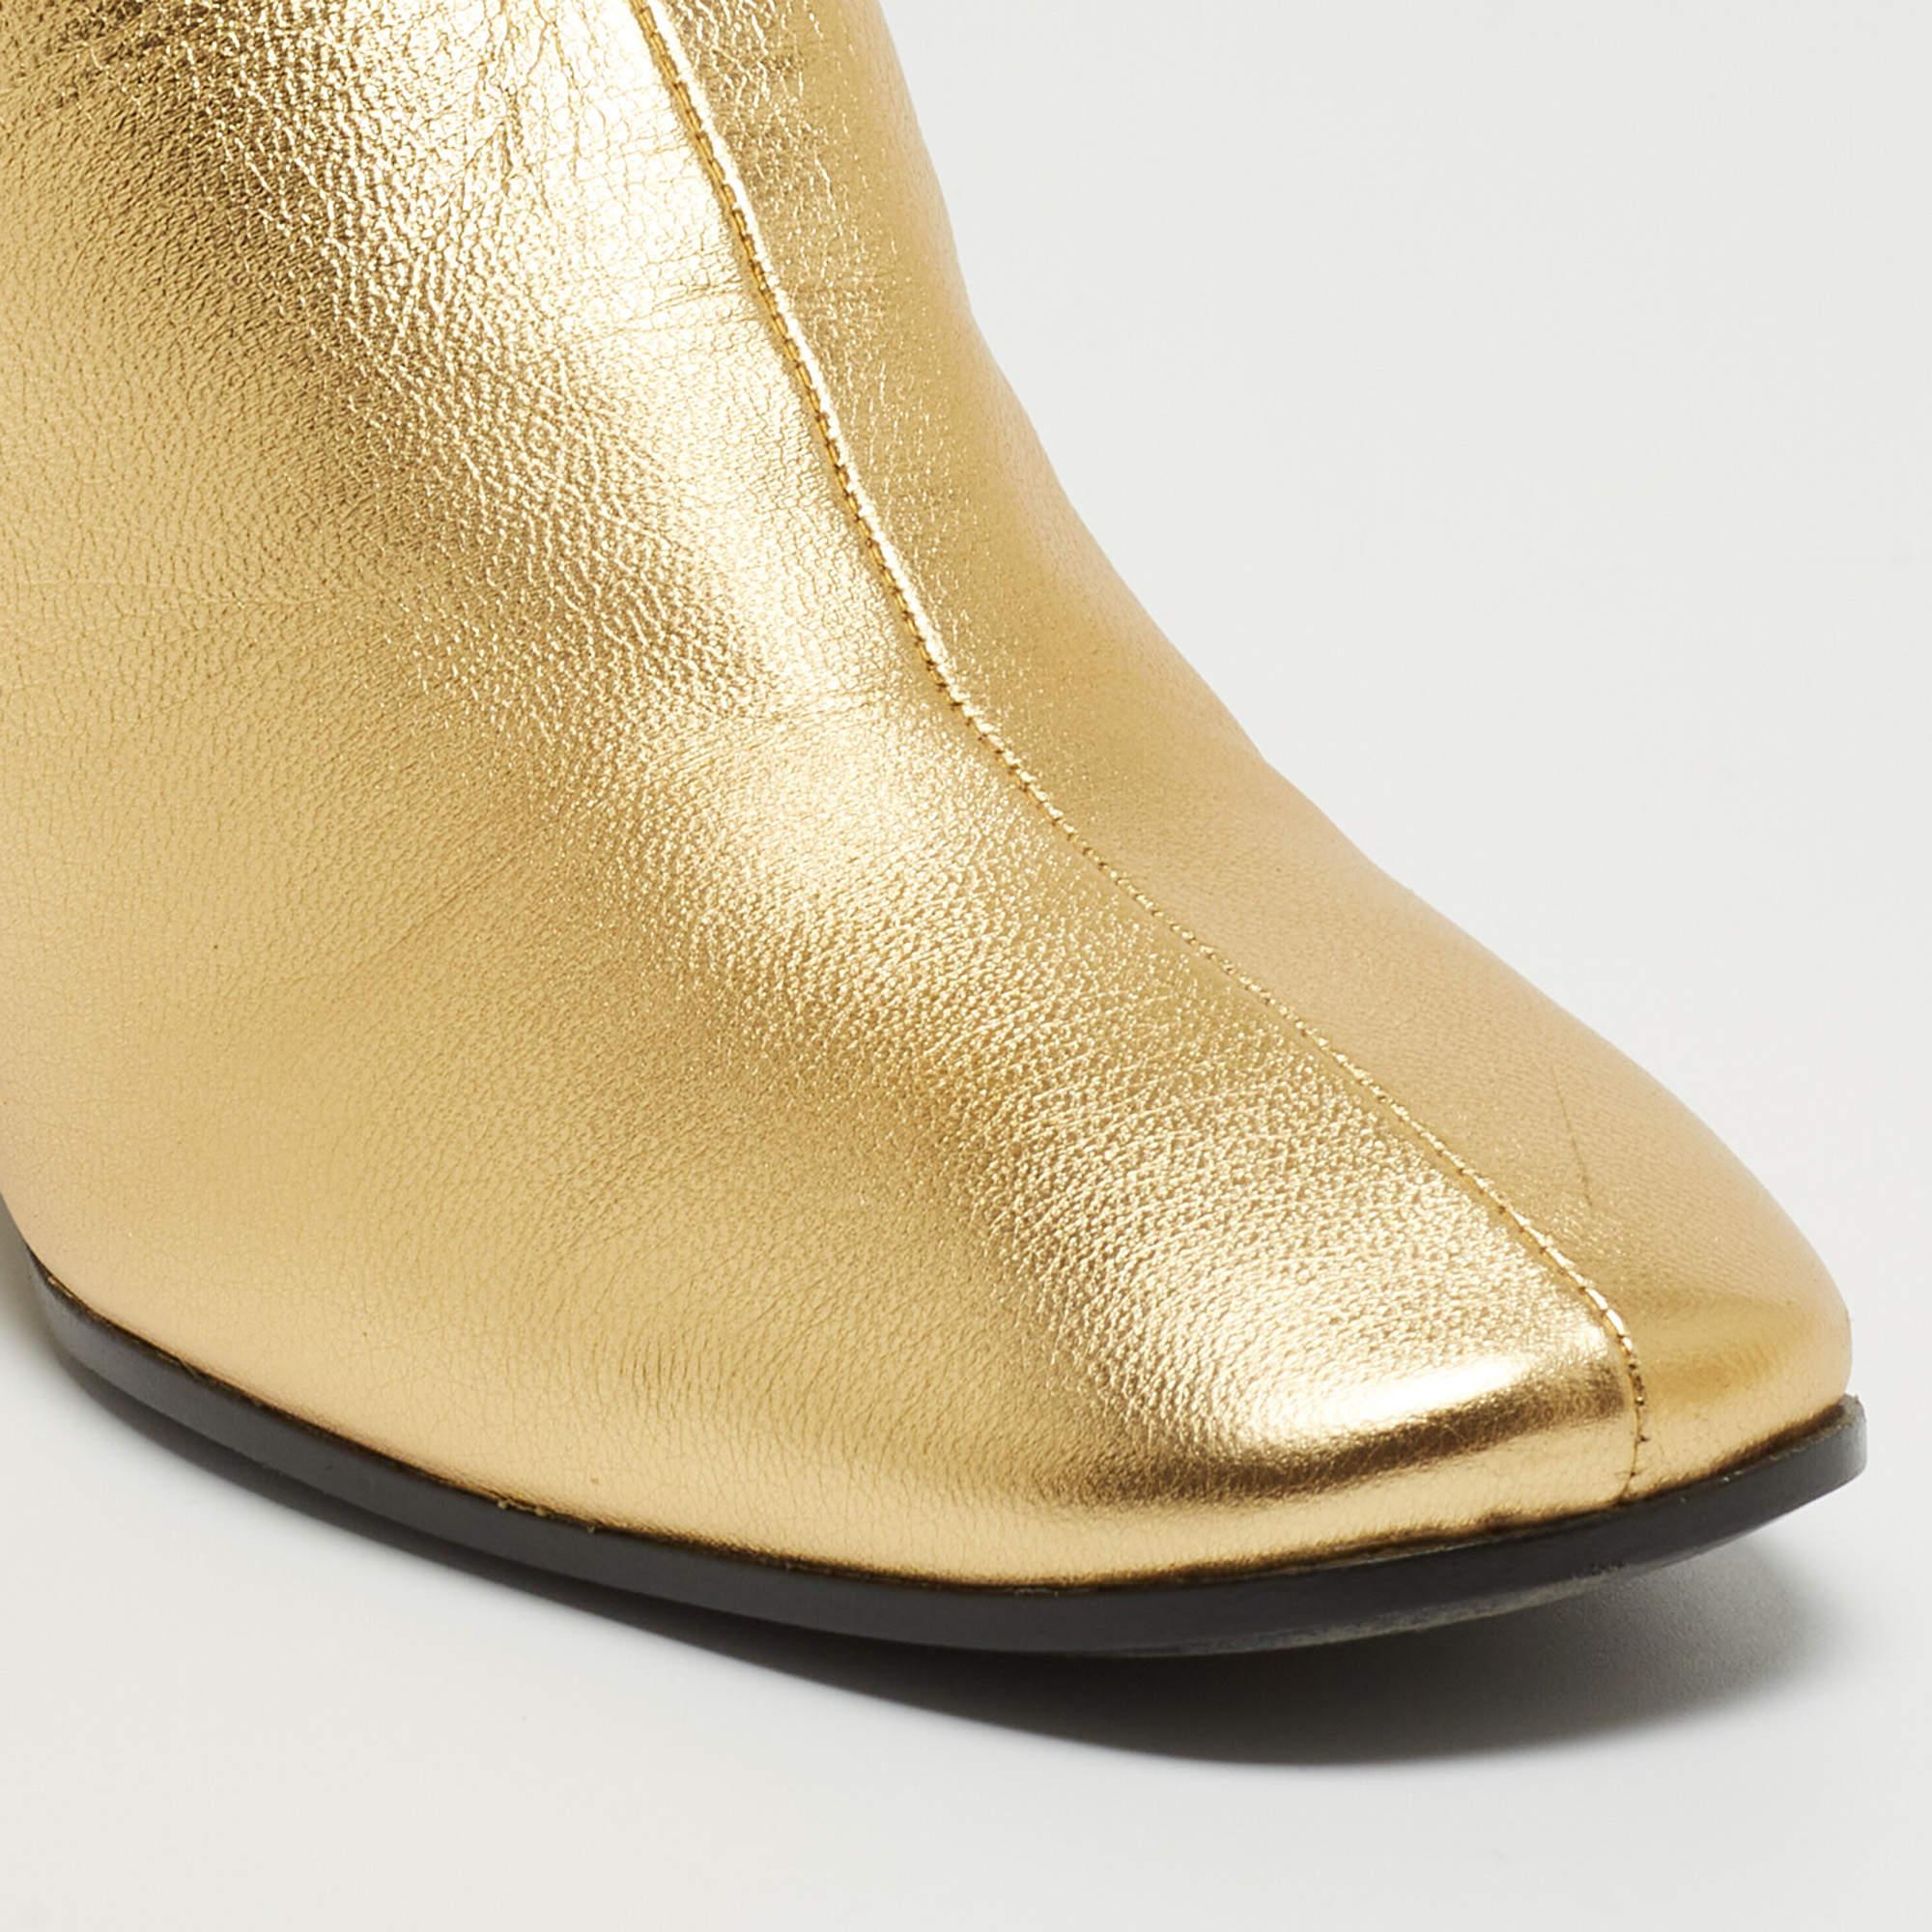 Prada Metallic Gold Leather Ankle Boots Size 37 7